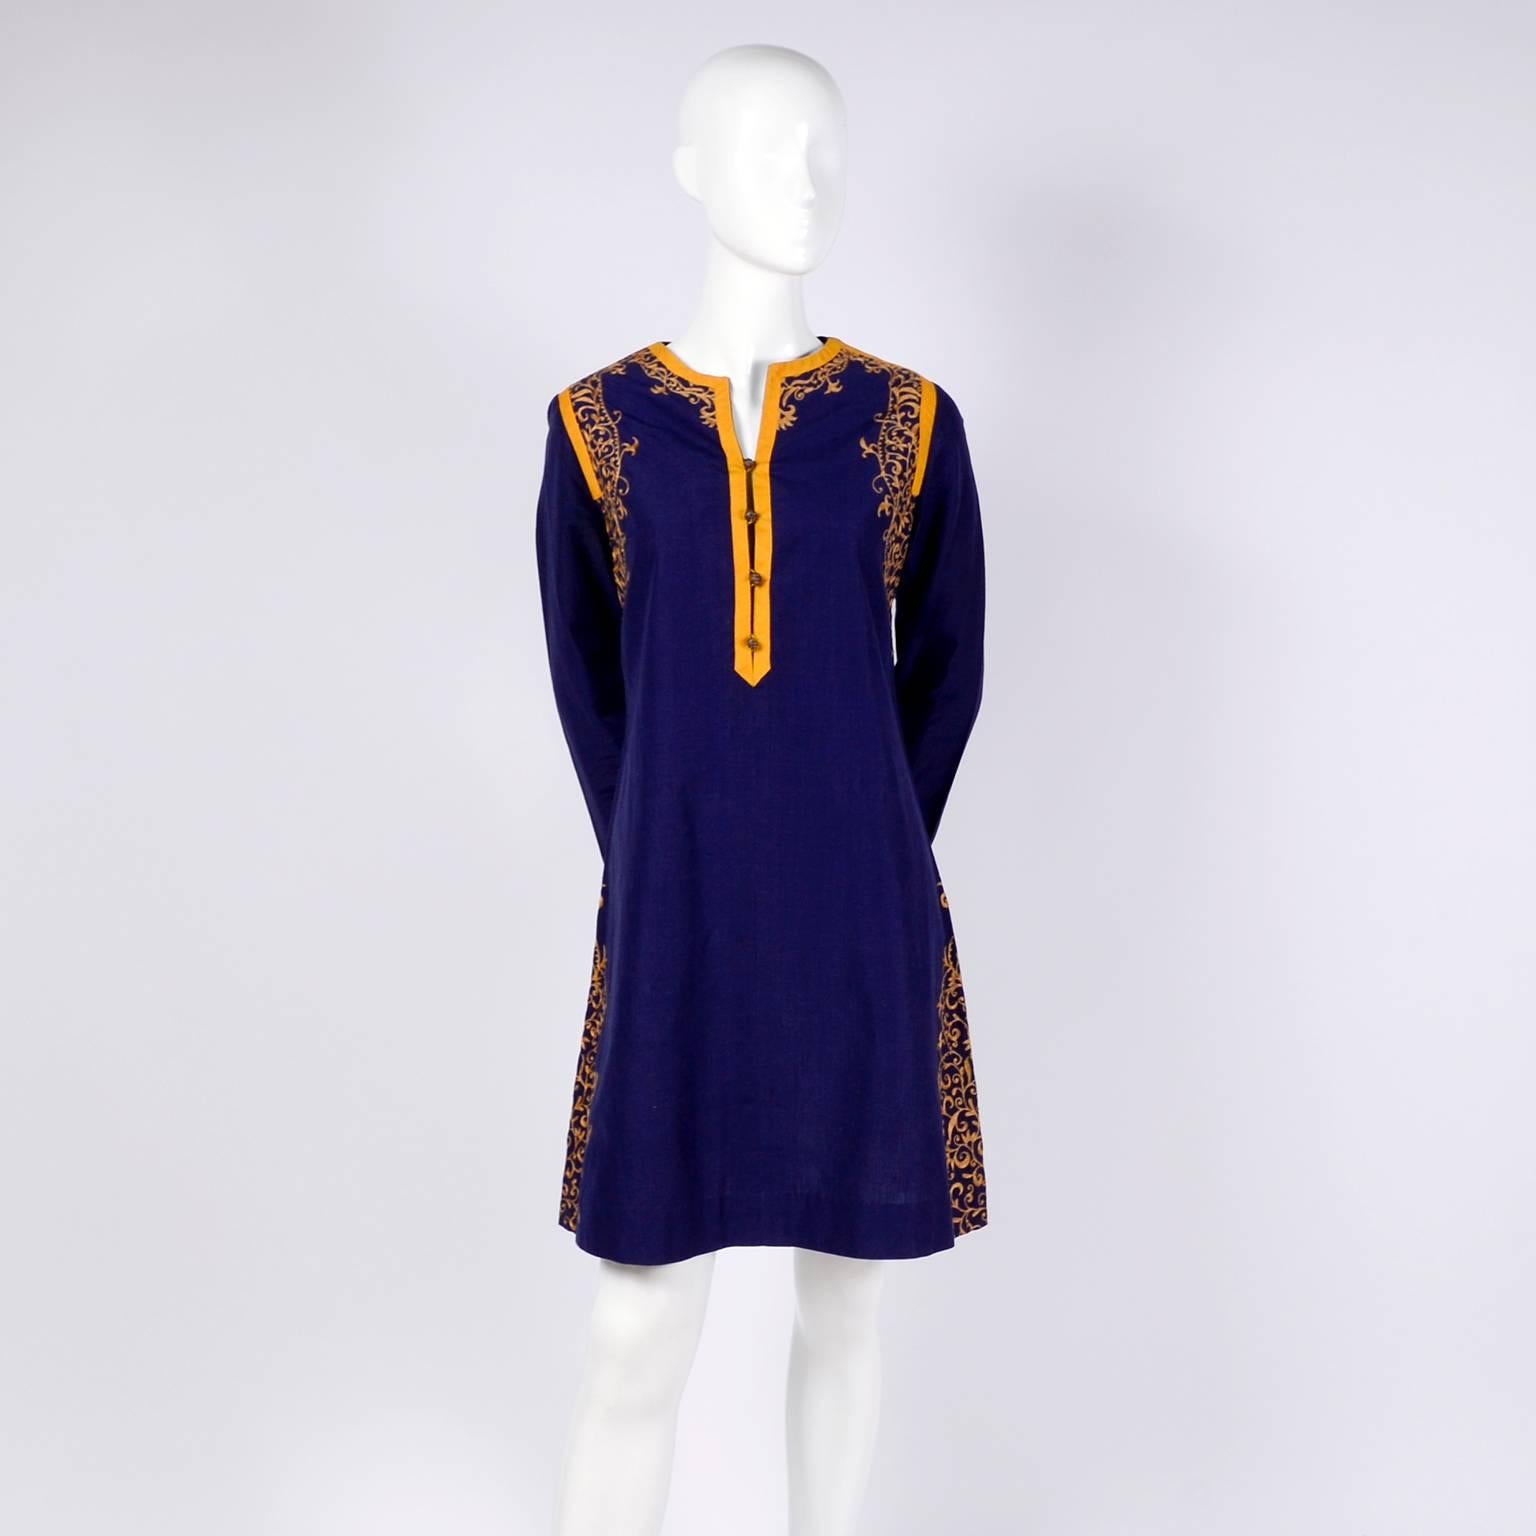 Aananda Vintage Navy Blue Cotton Dress Tunic with Marigold Embroidery, 1960s  3